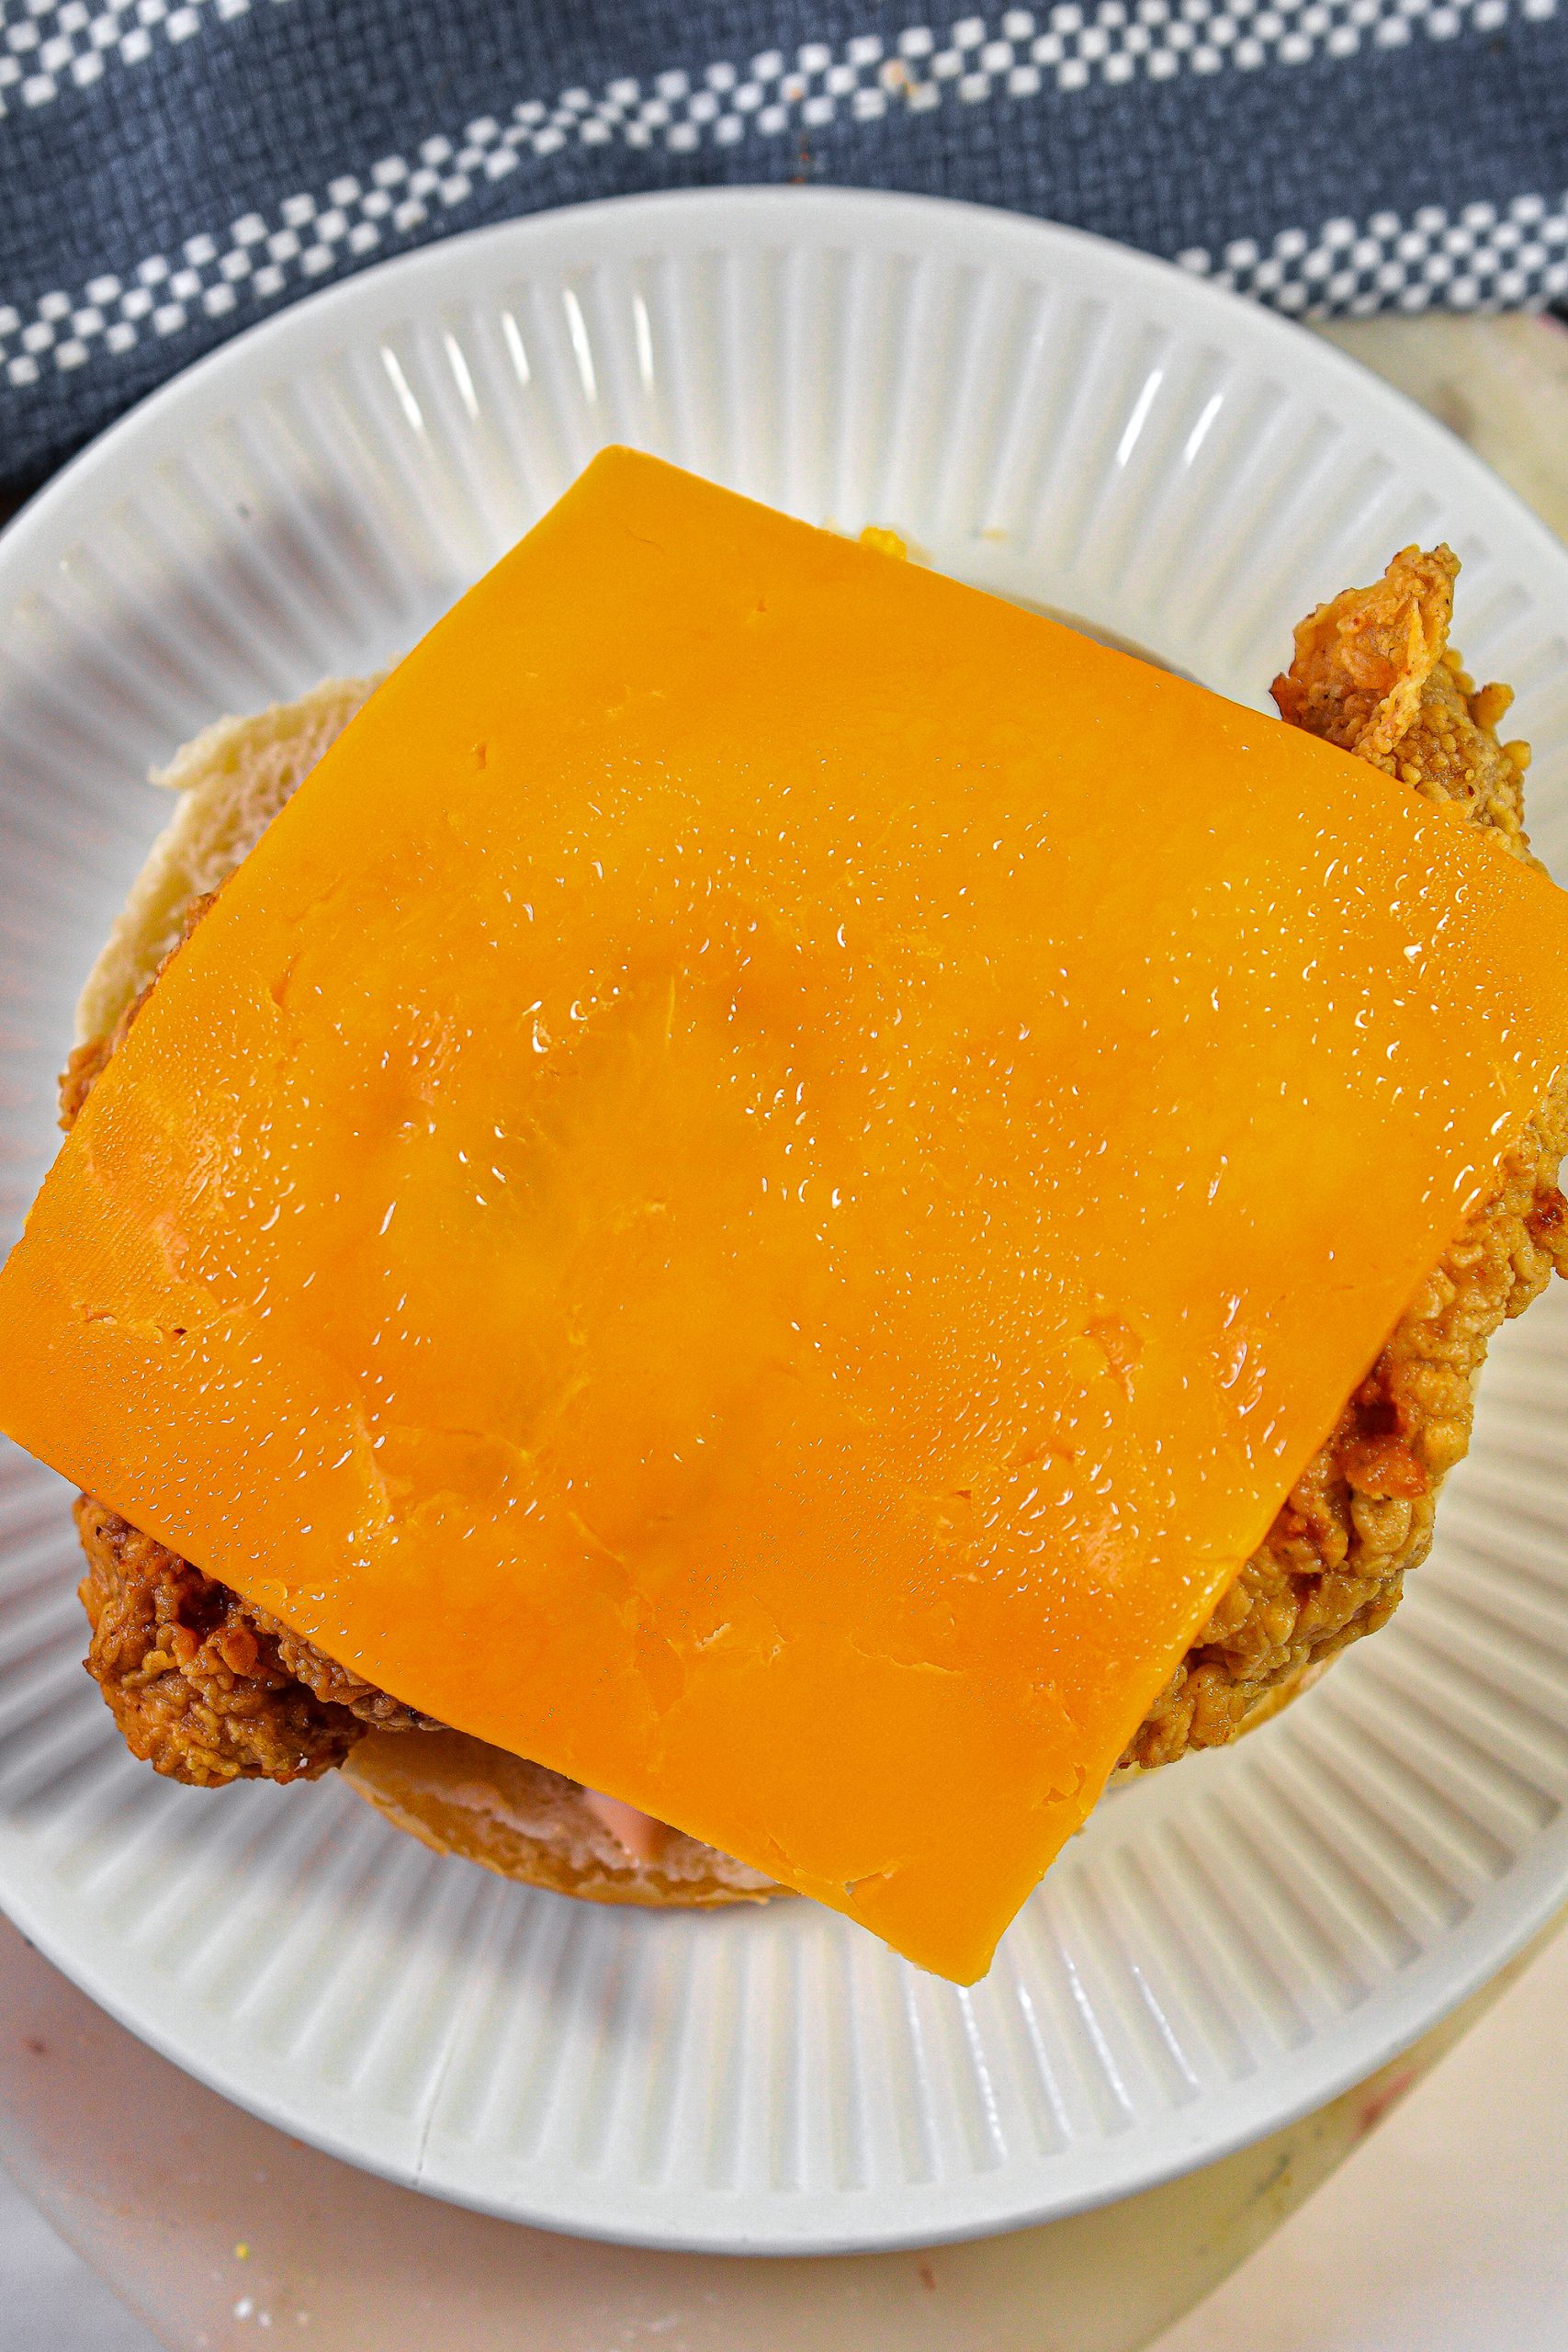 Top each piece of chicken with a slice of American cheese.